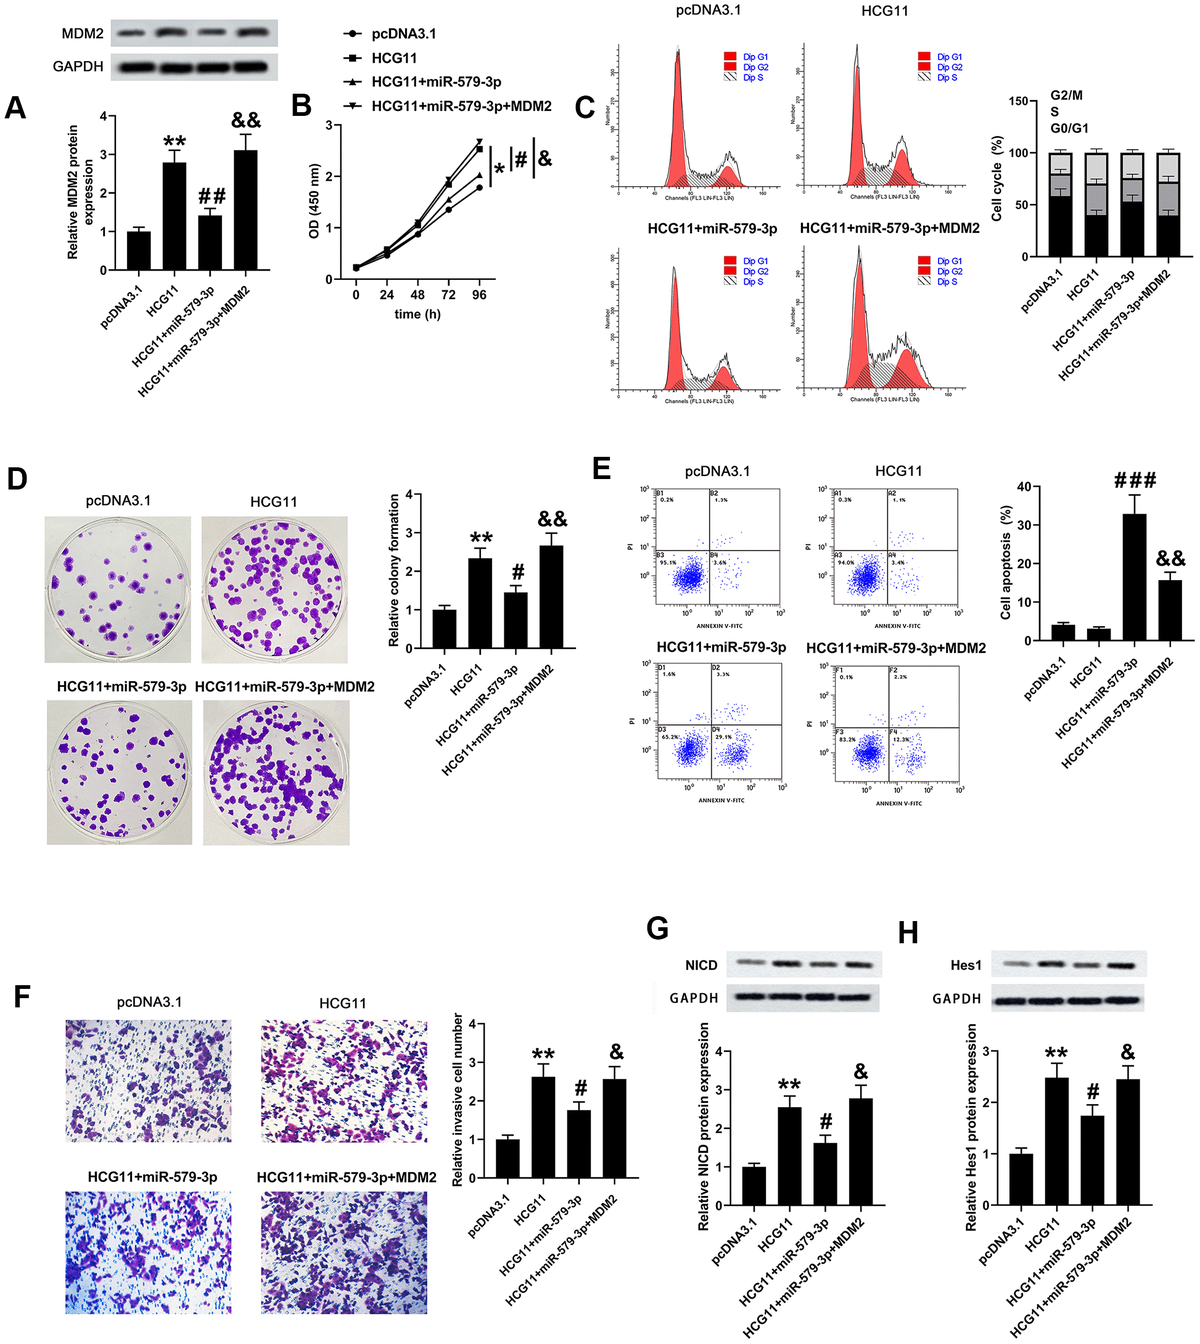 HCG11, miR-579-3p and MDM2 co-regulated the biological behaviors of pancreatic carcinoma cells partly by regulating Notch/Hes1 pathway. (A) MDM2 protein expression AsPC-1 cells was detected by western blotting assay after upregulation of HCG11, HCG11+miR-579-3p, or HCG11+miR-579-3p+MDM2. (B–D) The OD values, cell cycle and clones number in AsPC-1 cells were analyzed by CCK-8, flow cytometry and colony formation assays when treatment with HCG11, HCG11+miR-579-3p, or HCG11+miR-579-3p+MDM2. (E) The apoptosis rates of AsPC-1 cells were determined by flow cytometry assay following HCG11, HCG11+miR-579-3p, or HCG11+miR-579-3p+MDM2 treatment. (F) The invaded number of AsPC-1 cells was estimated by Transwell chamber when treated by HCG11, HCG11+miR-579-3p, or HCG11+miR-579-3p+MDM2. (G, H) The protein expression levels of NICD and Hes1 in AsPC-1 cells were measured by western blotting assay after upregulation of HCG11, HCG11+miR-579-3p, or HCG11+miR-579-3p+MDM2. *p**p#p##p###p&p&&p